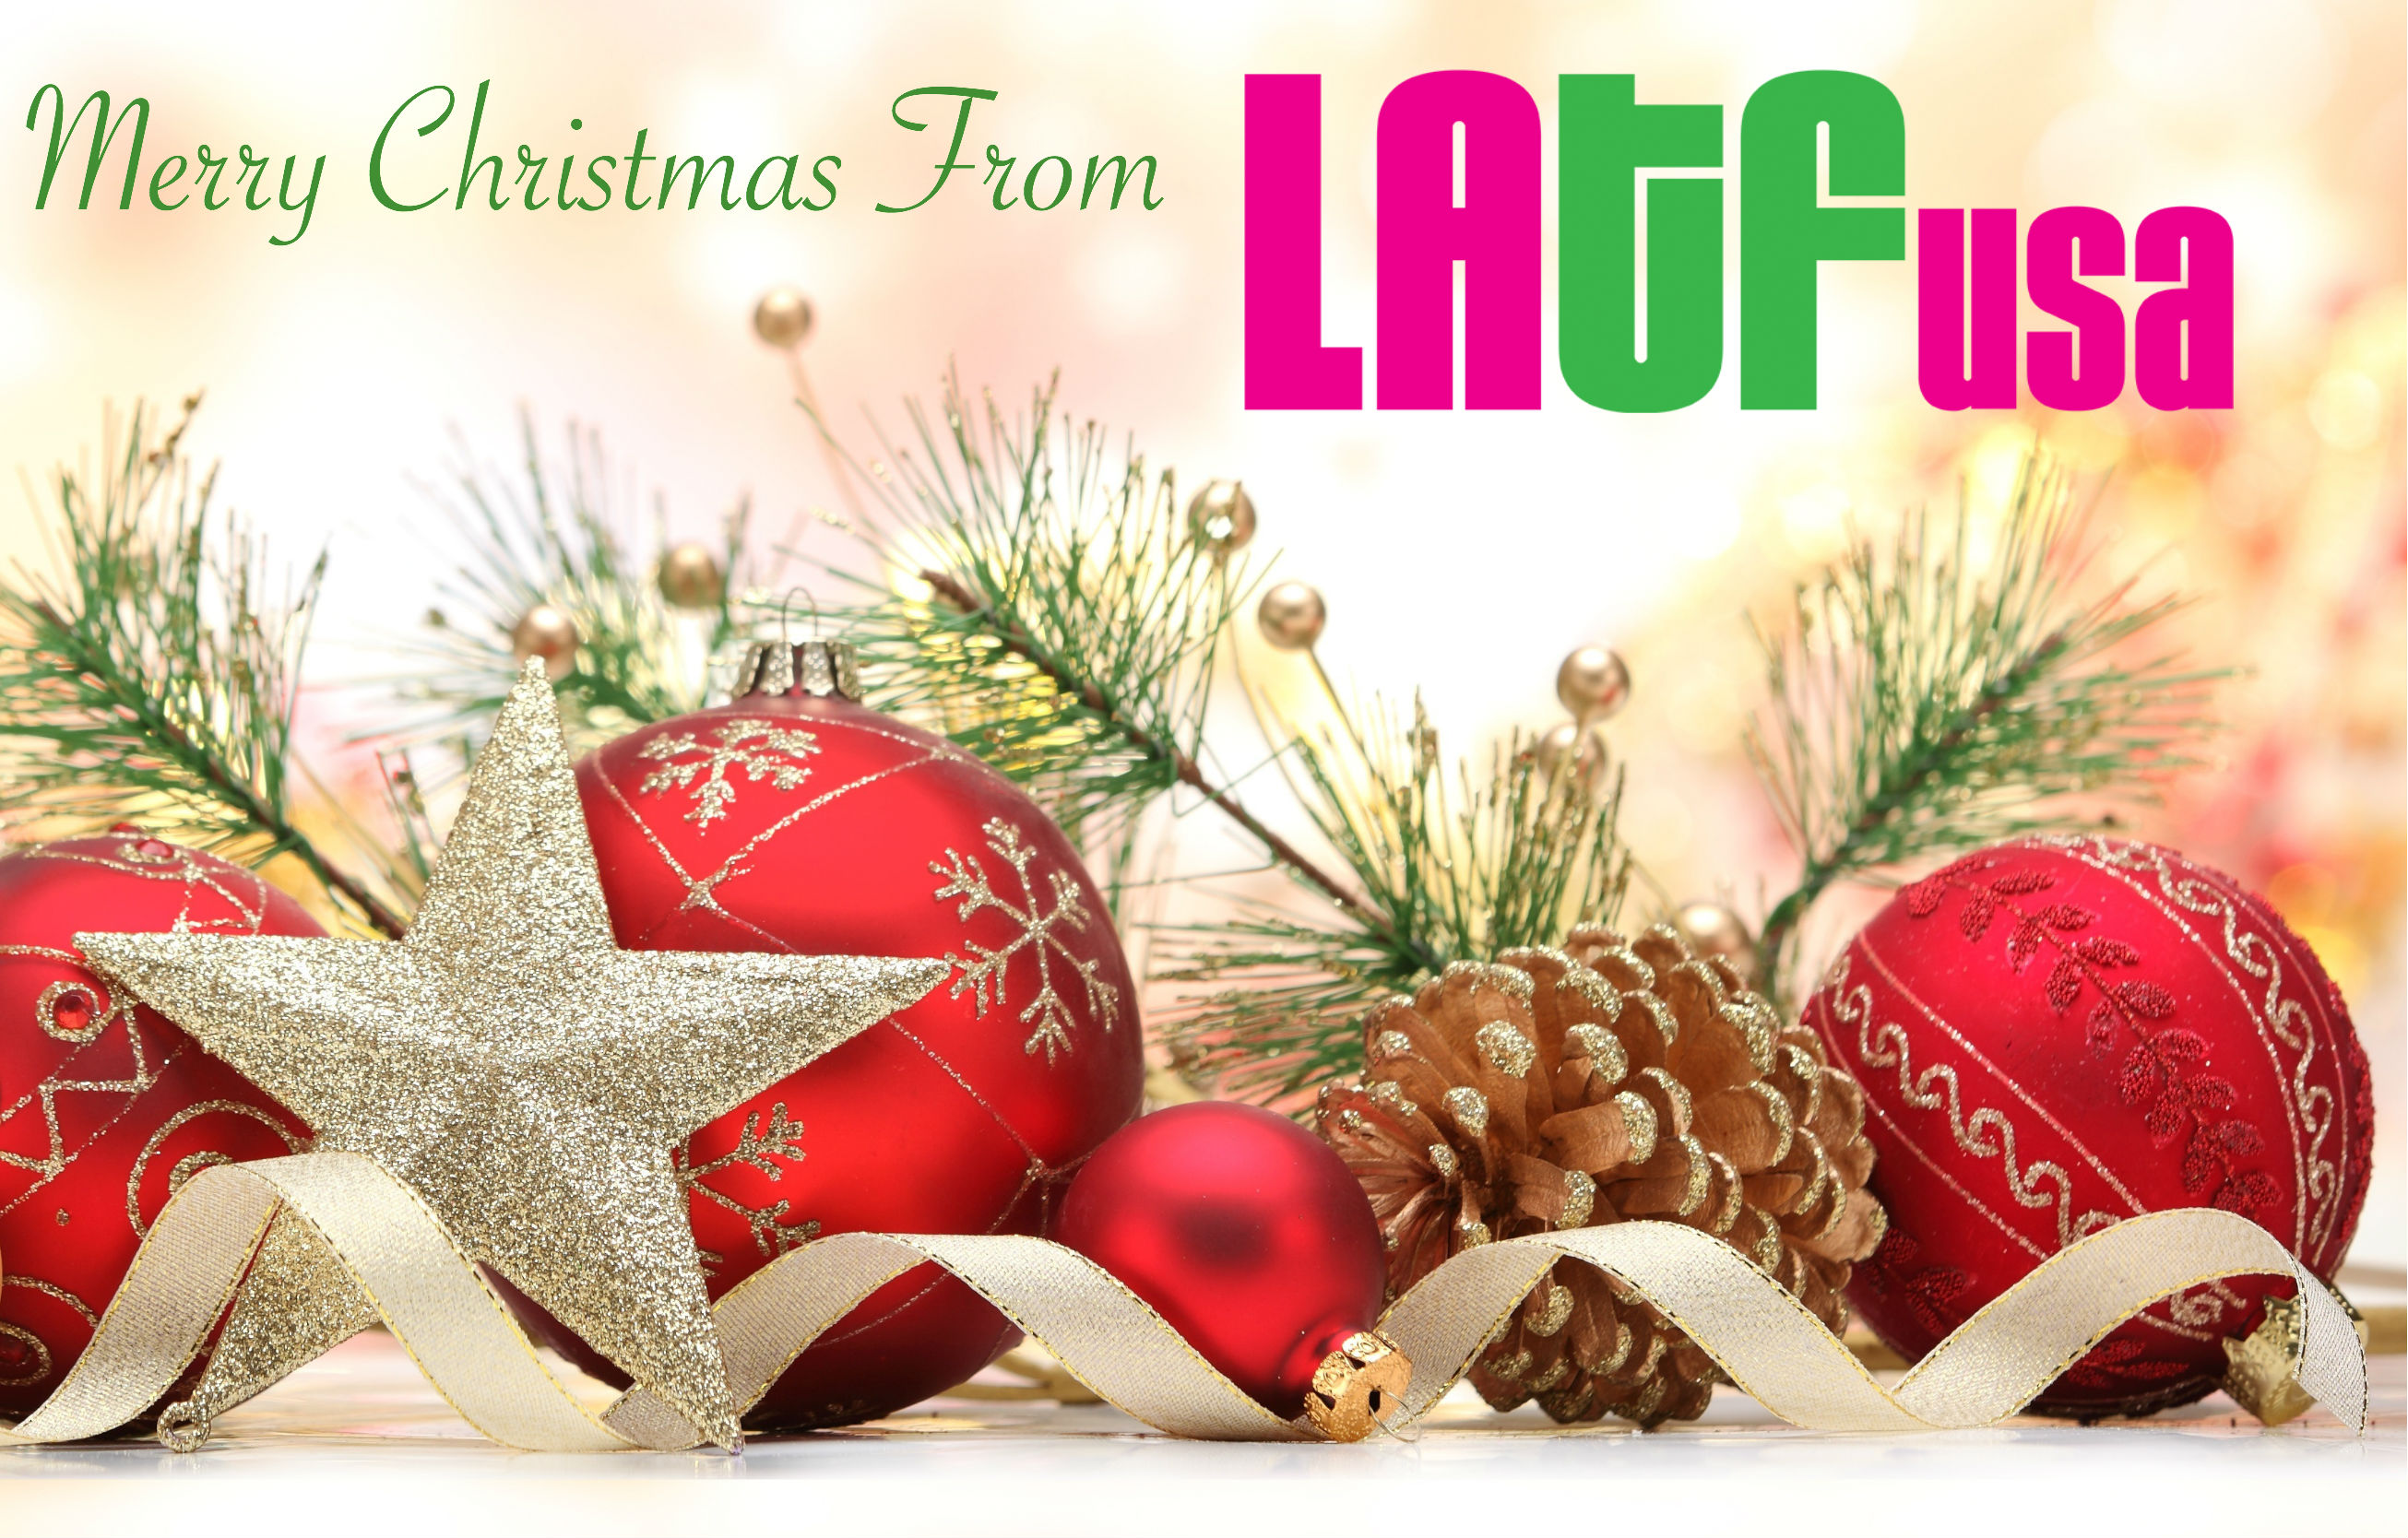 MERRY CHRISTMAS FROM LATFUSA